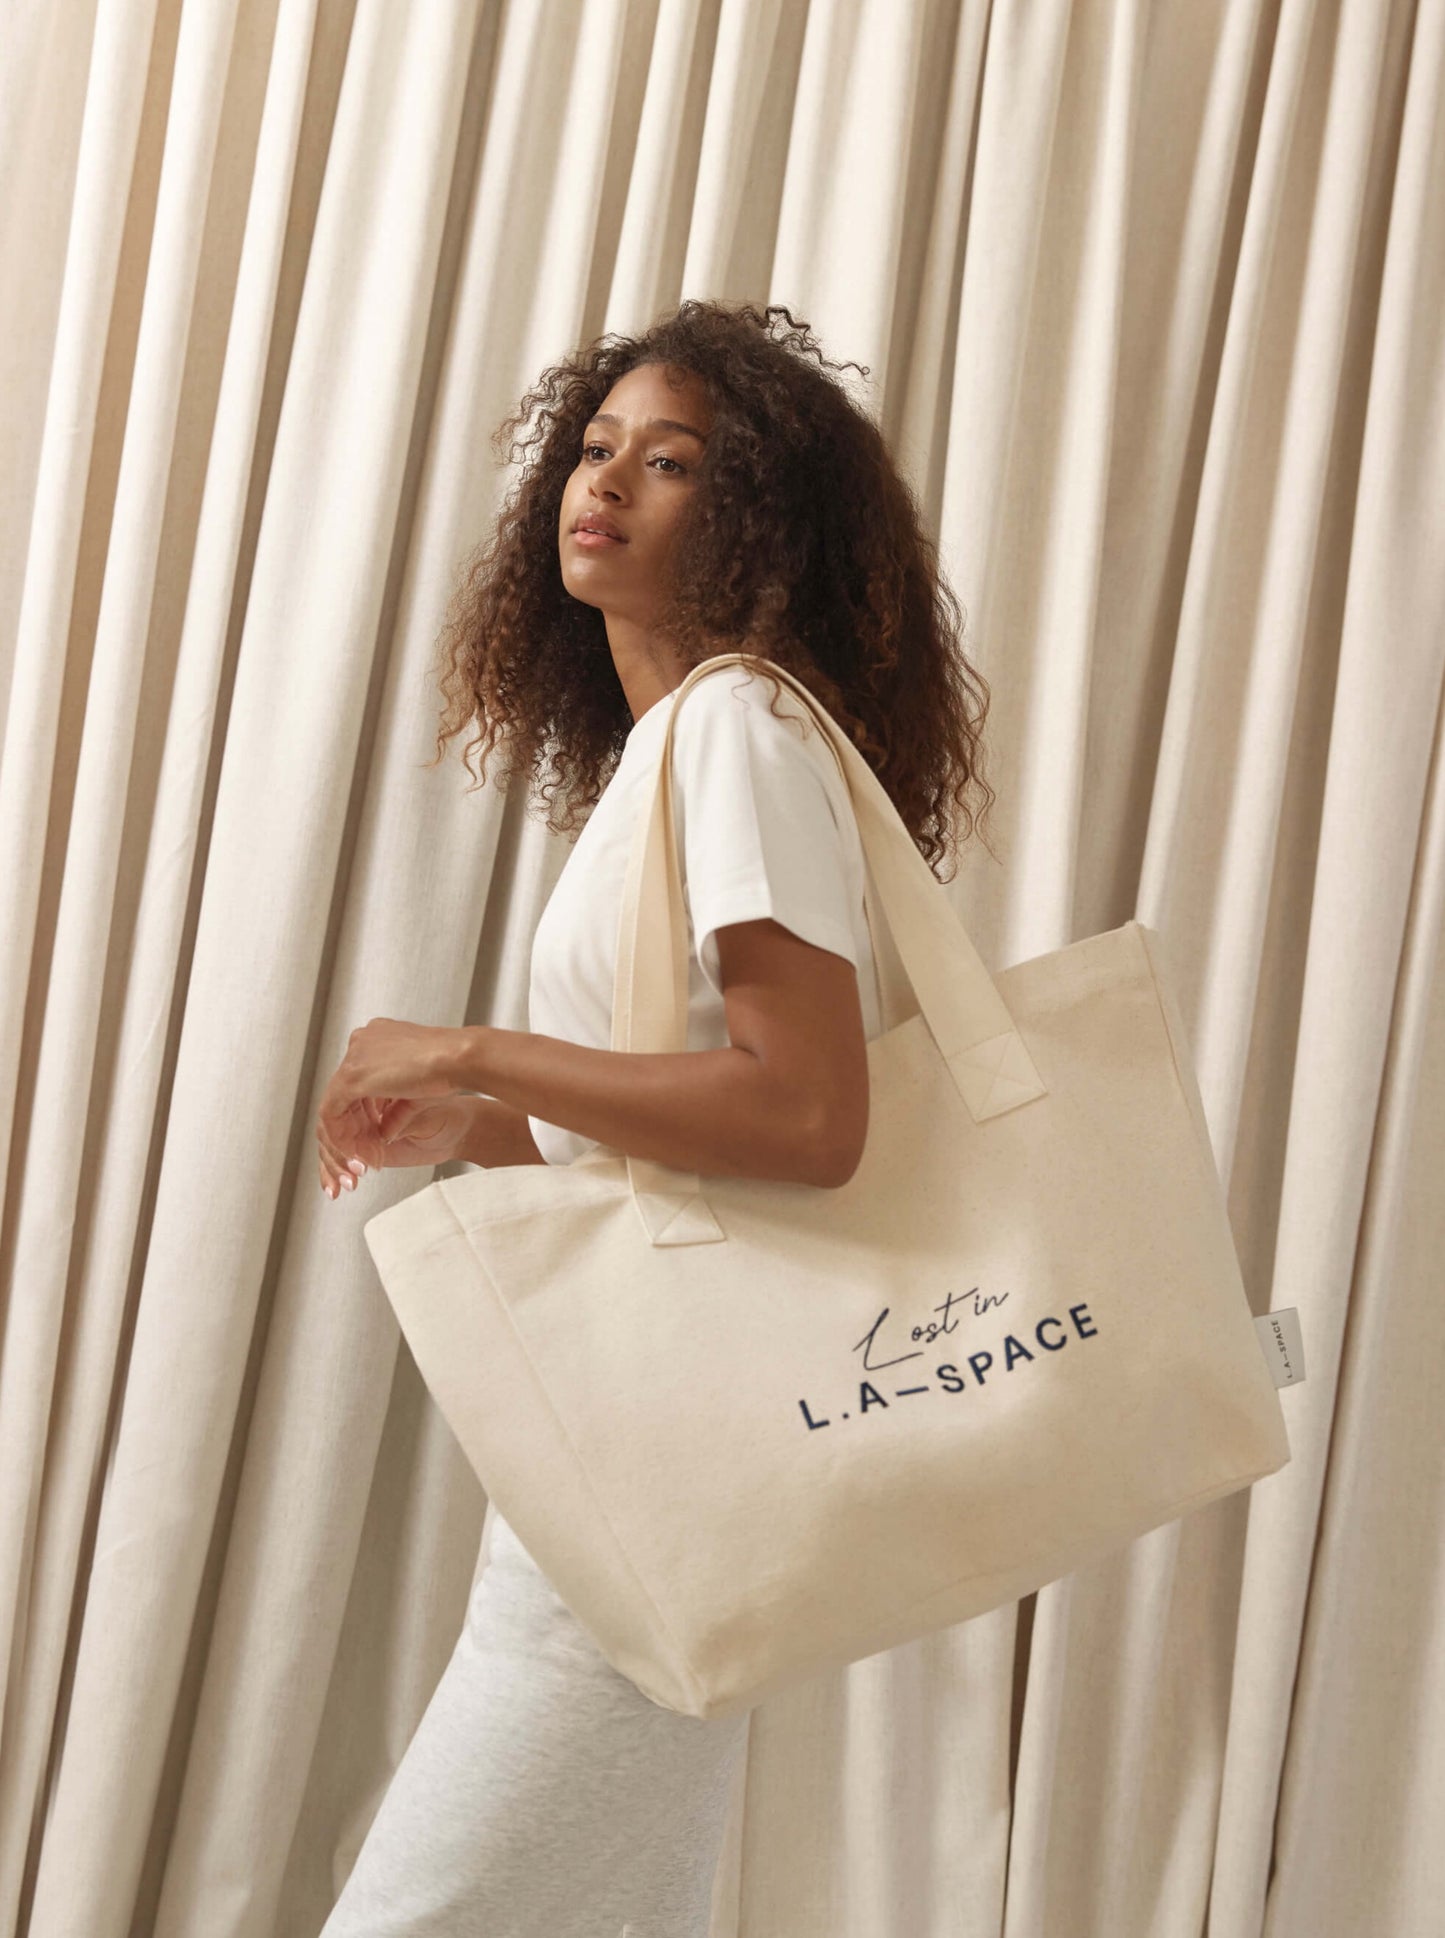 'LOST IN L.A-SPACE' EMBROIDERED TOTE BAG IN CREAM